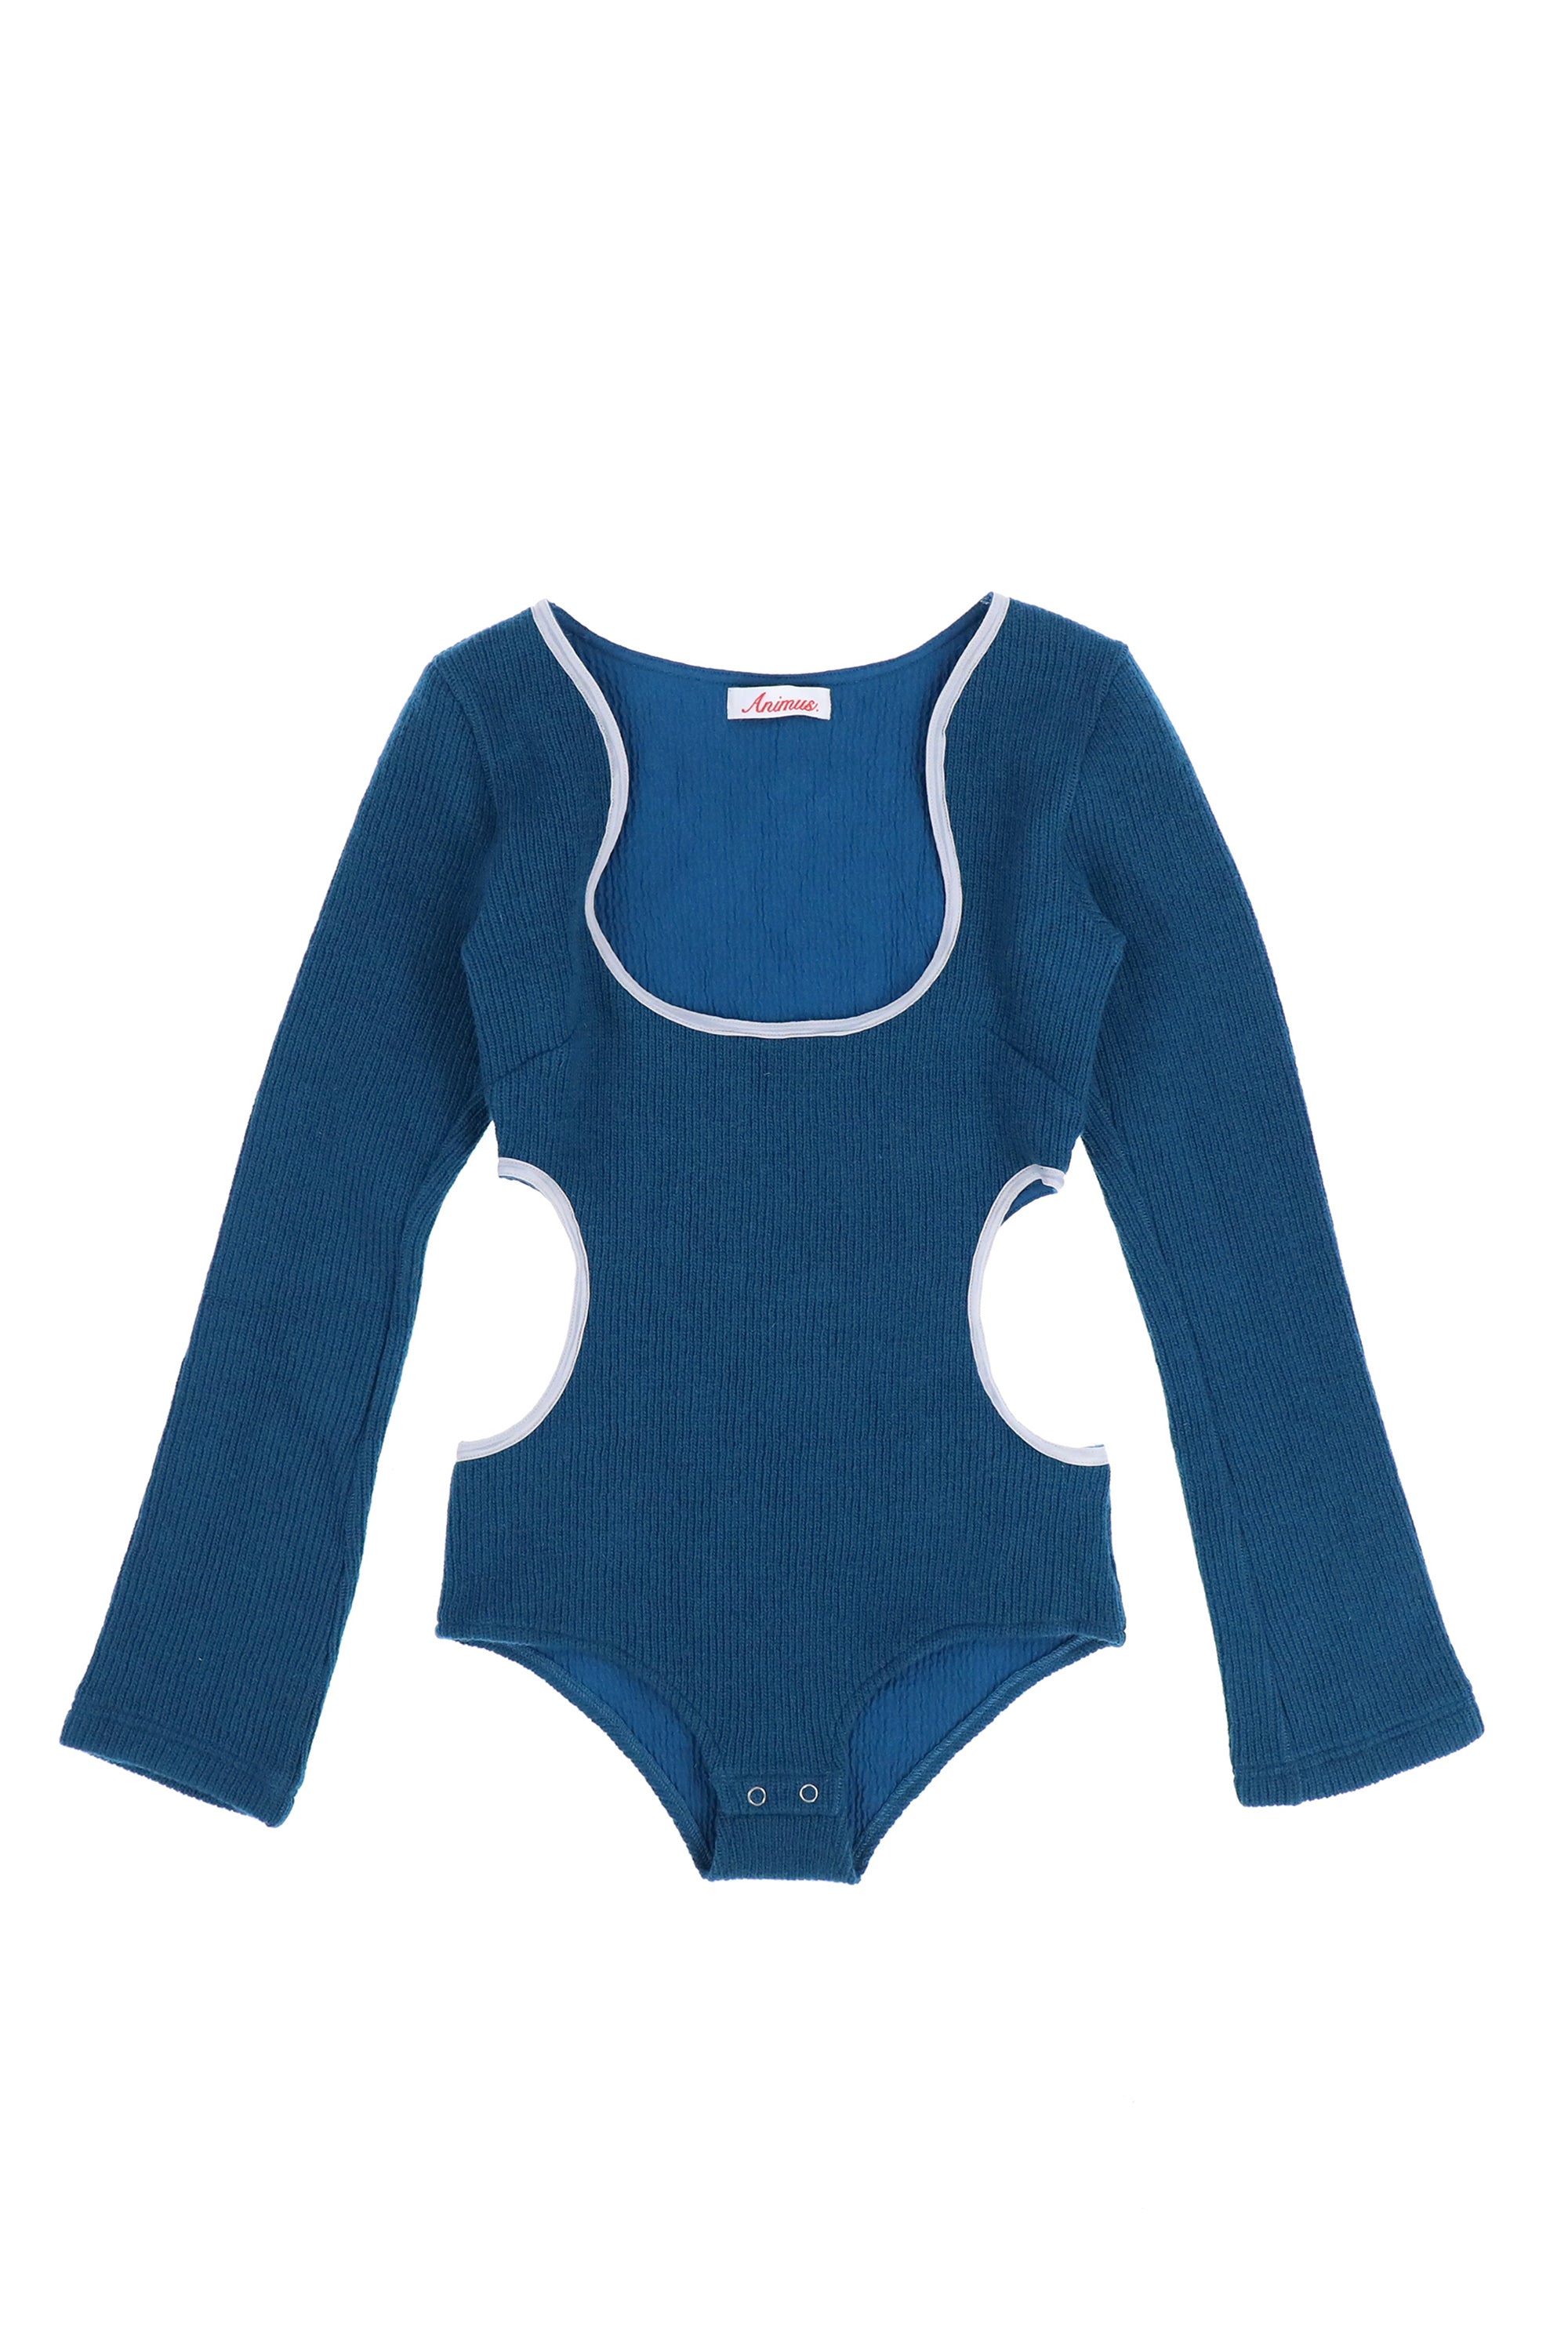 Animus. アニムス FW23 BODY SUITE BY KNITTING / L BLU -NUBIAN